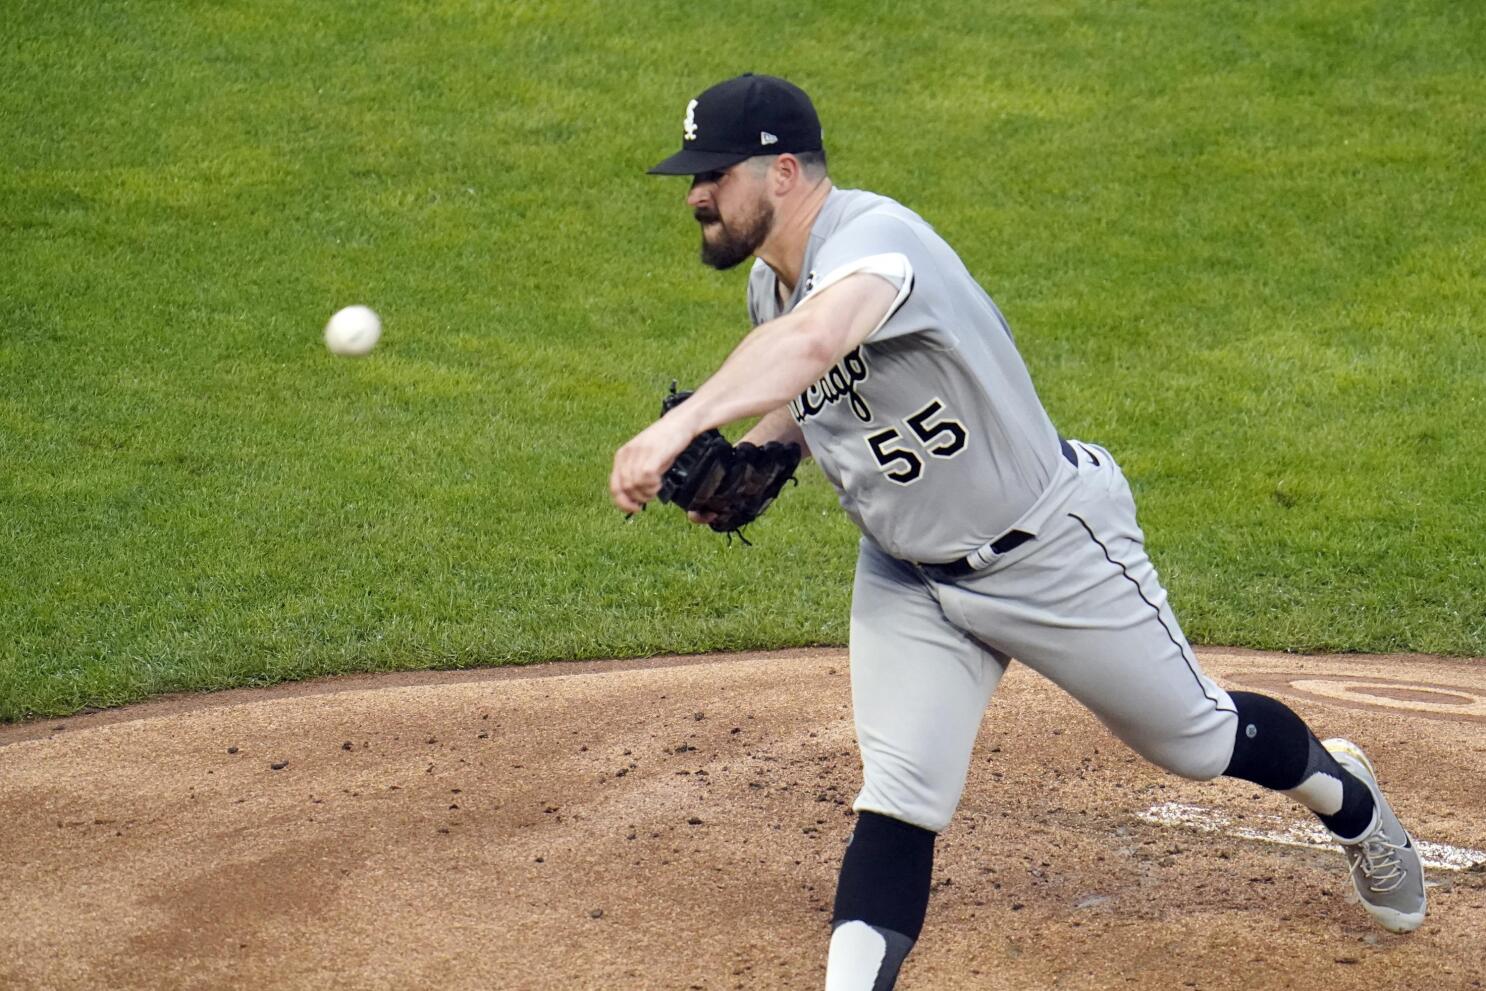 Not pitching in All-Star Game should benefit Rodon, White Sox